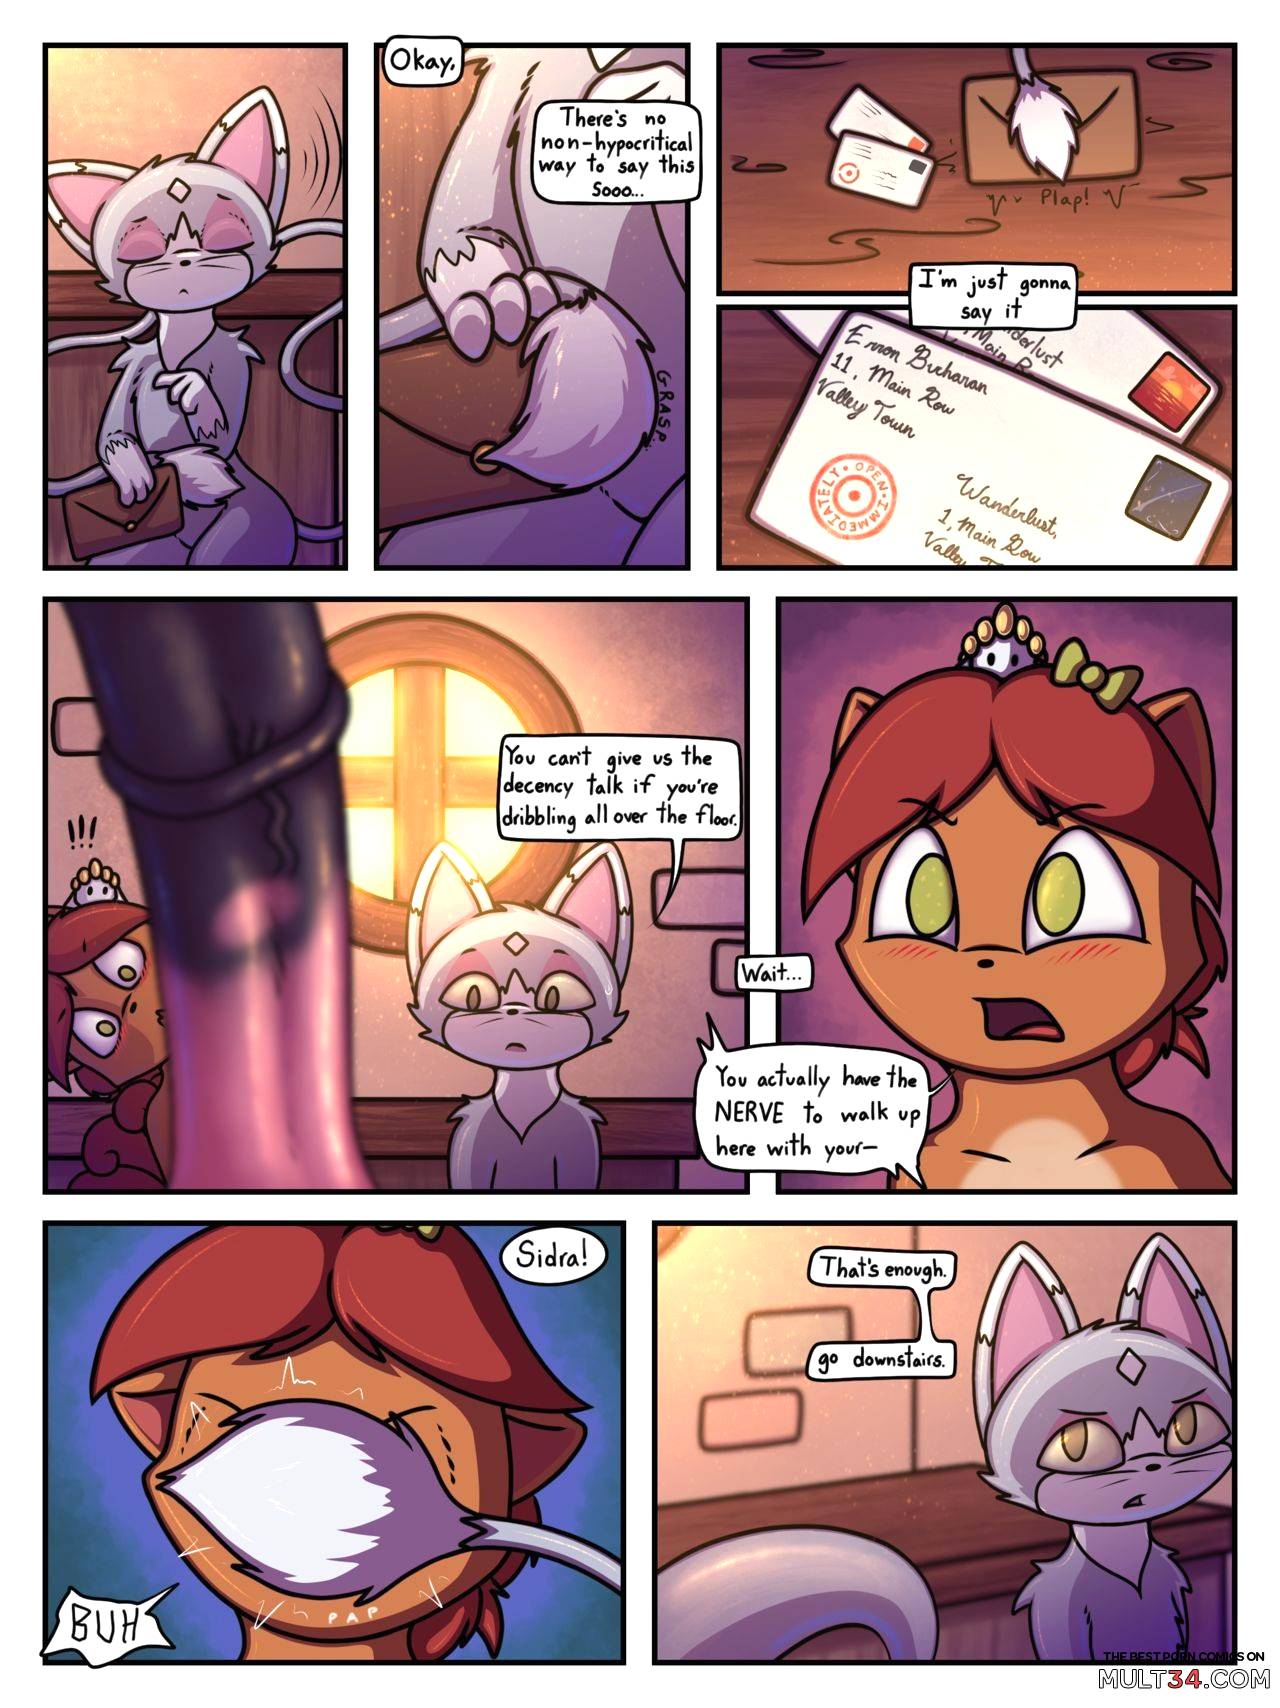 Wanderlust chapter 1 page 15